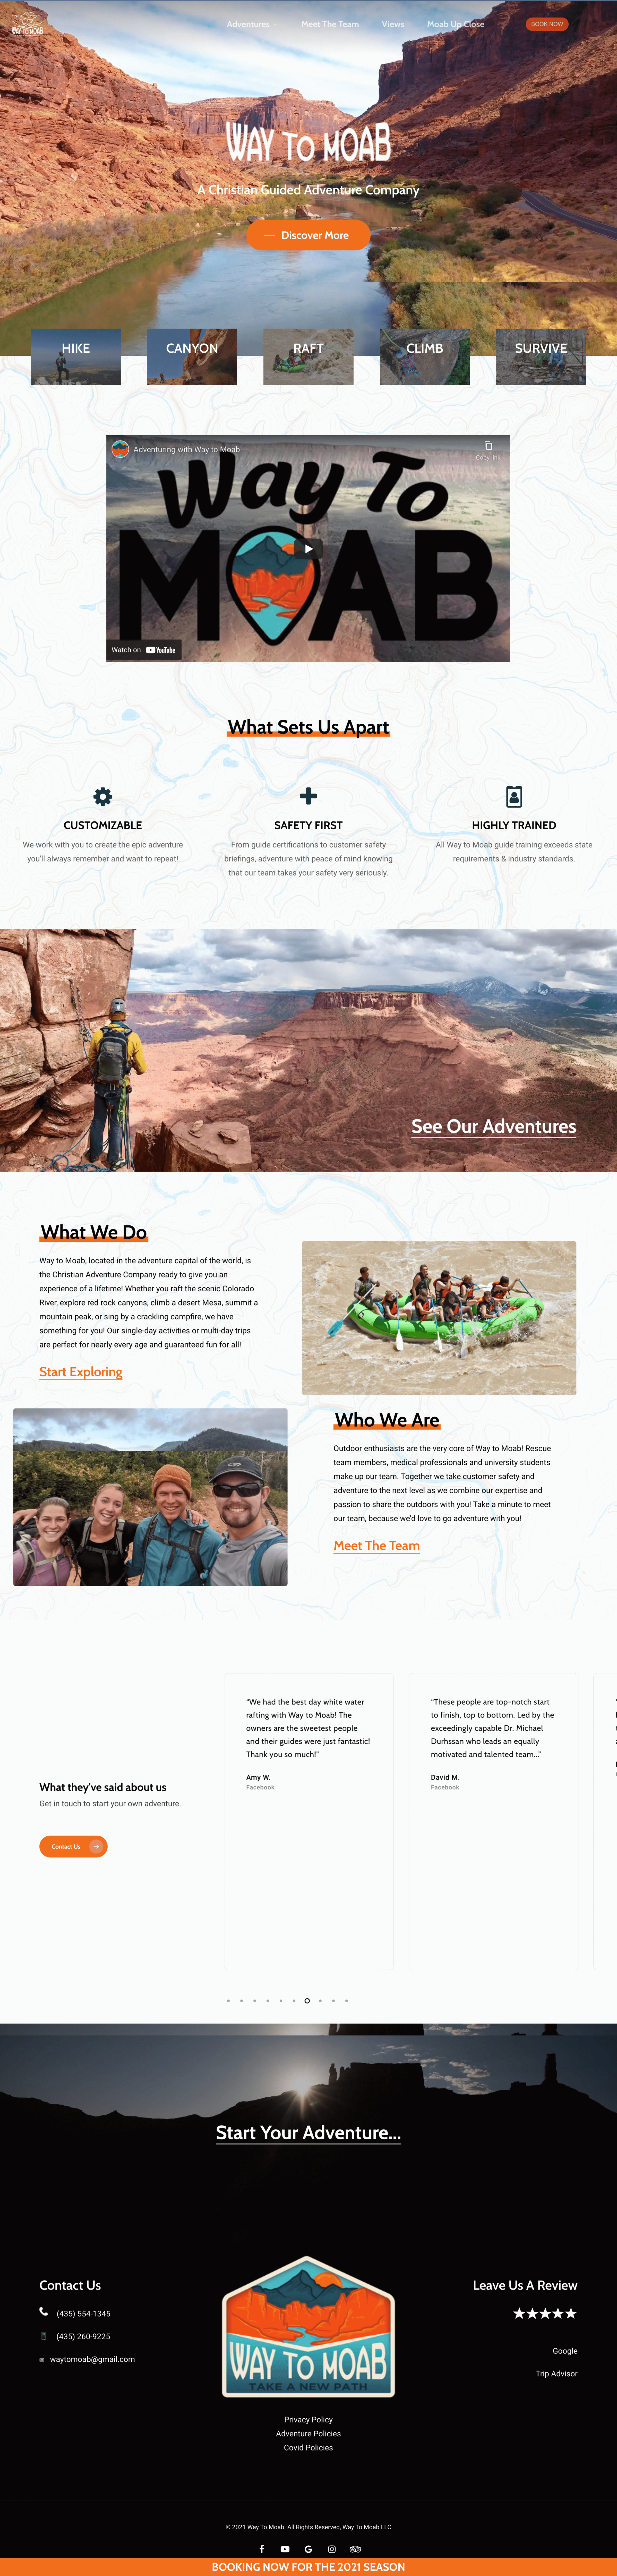 Way to moab full web landing page - web design firm Big Red Jelly Provo Utah.